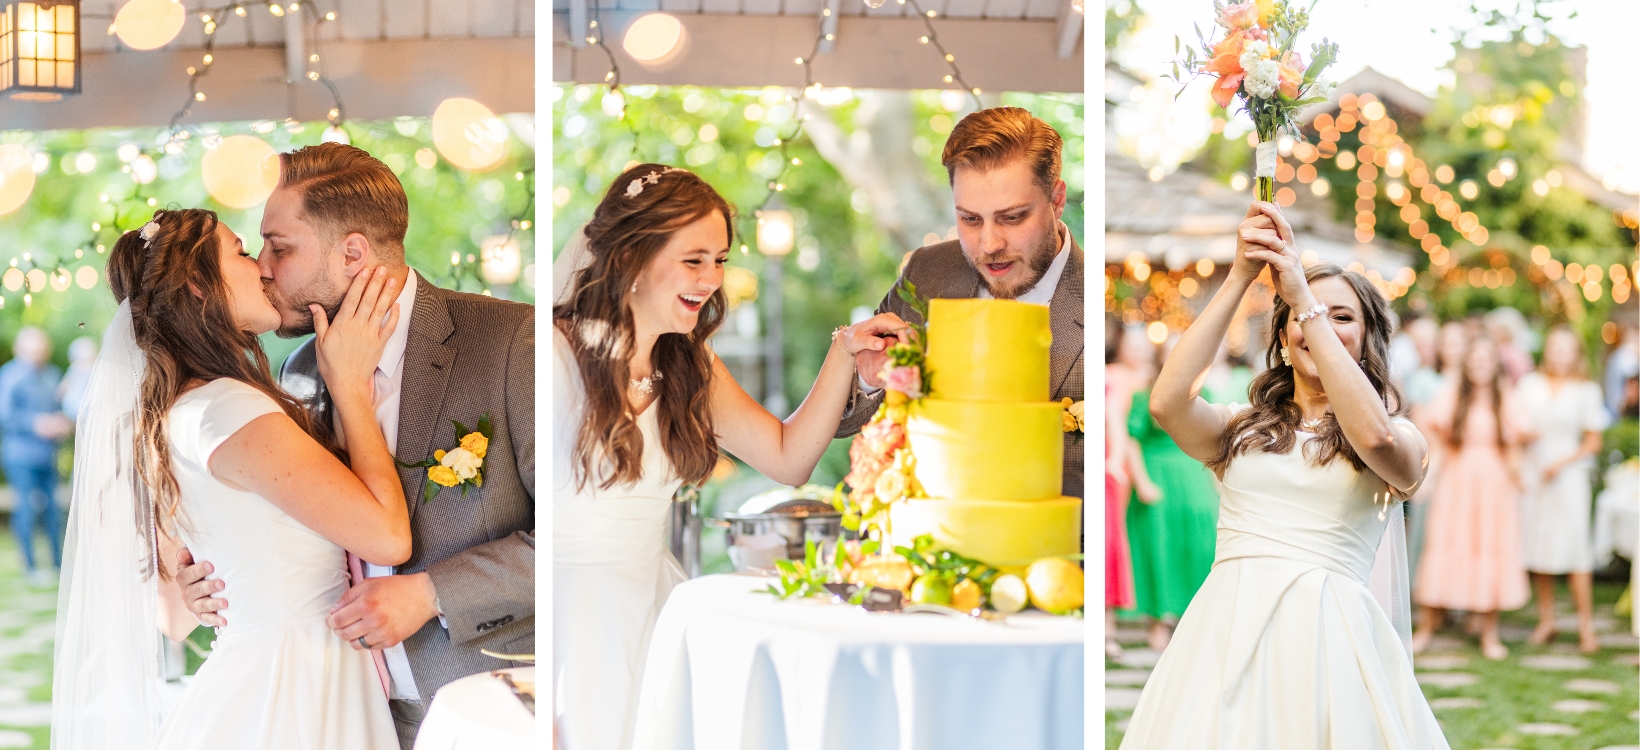 cake cutting under gazebo with twinkle lights, bright colored wedding inspiration